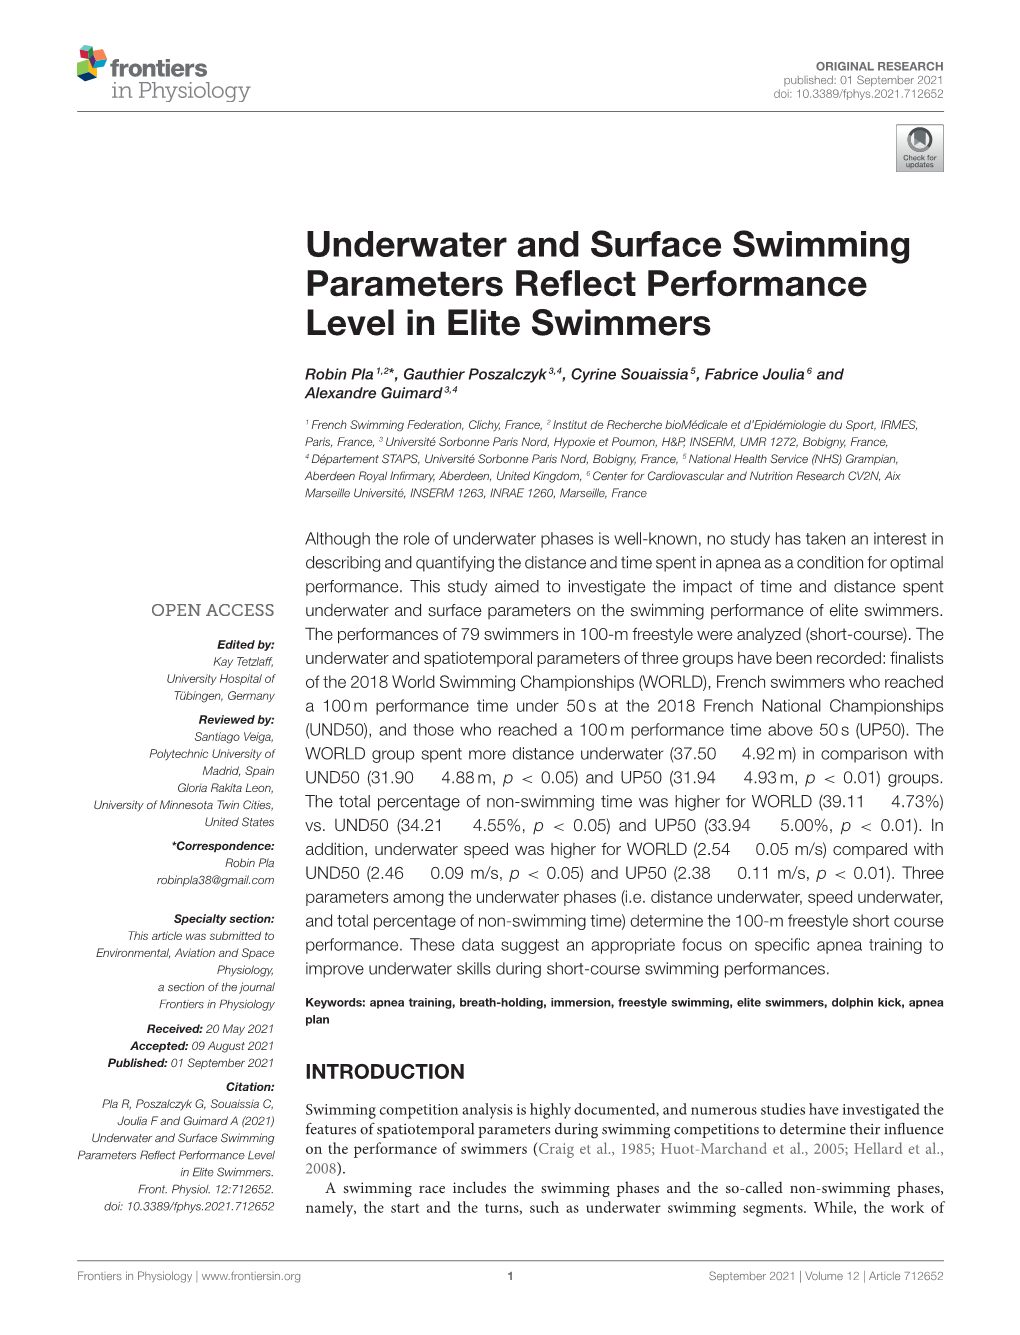 Underwater and Surface Swimming Parameters Reflect Performance